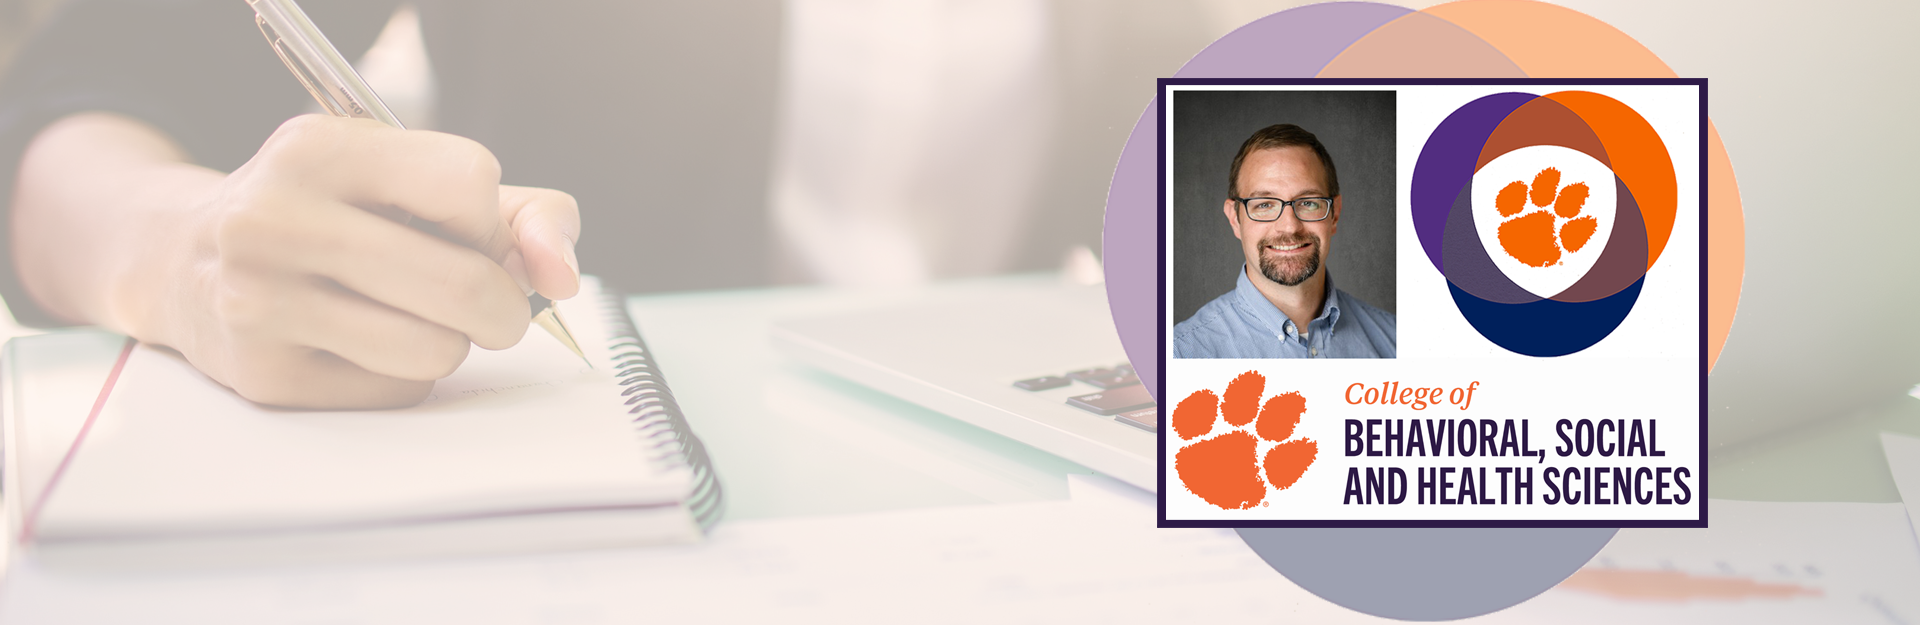 Ed Bowers to operationalize Clemson Elevate metrics for CBSHS in special assistant role